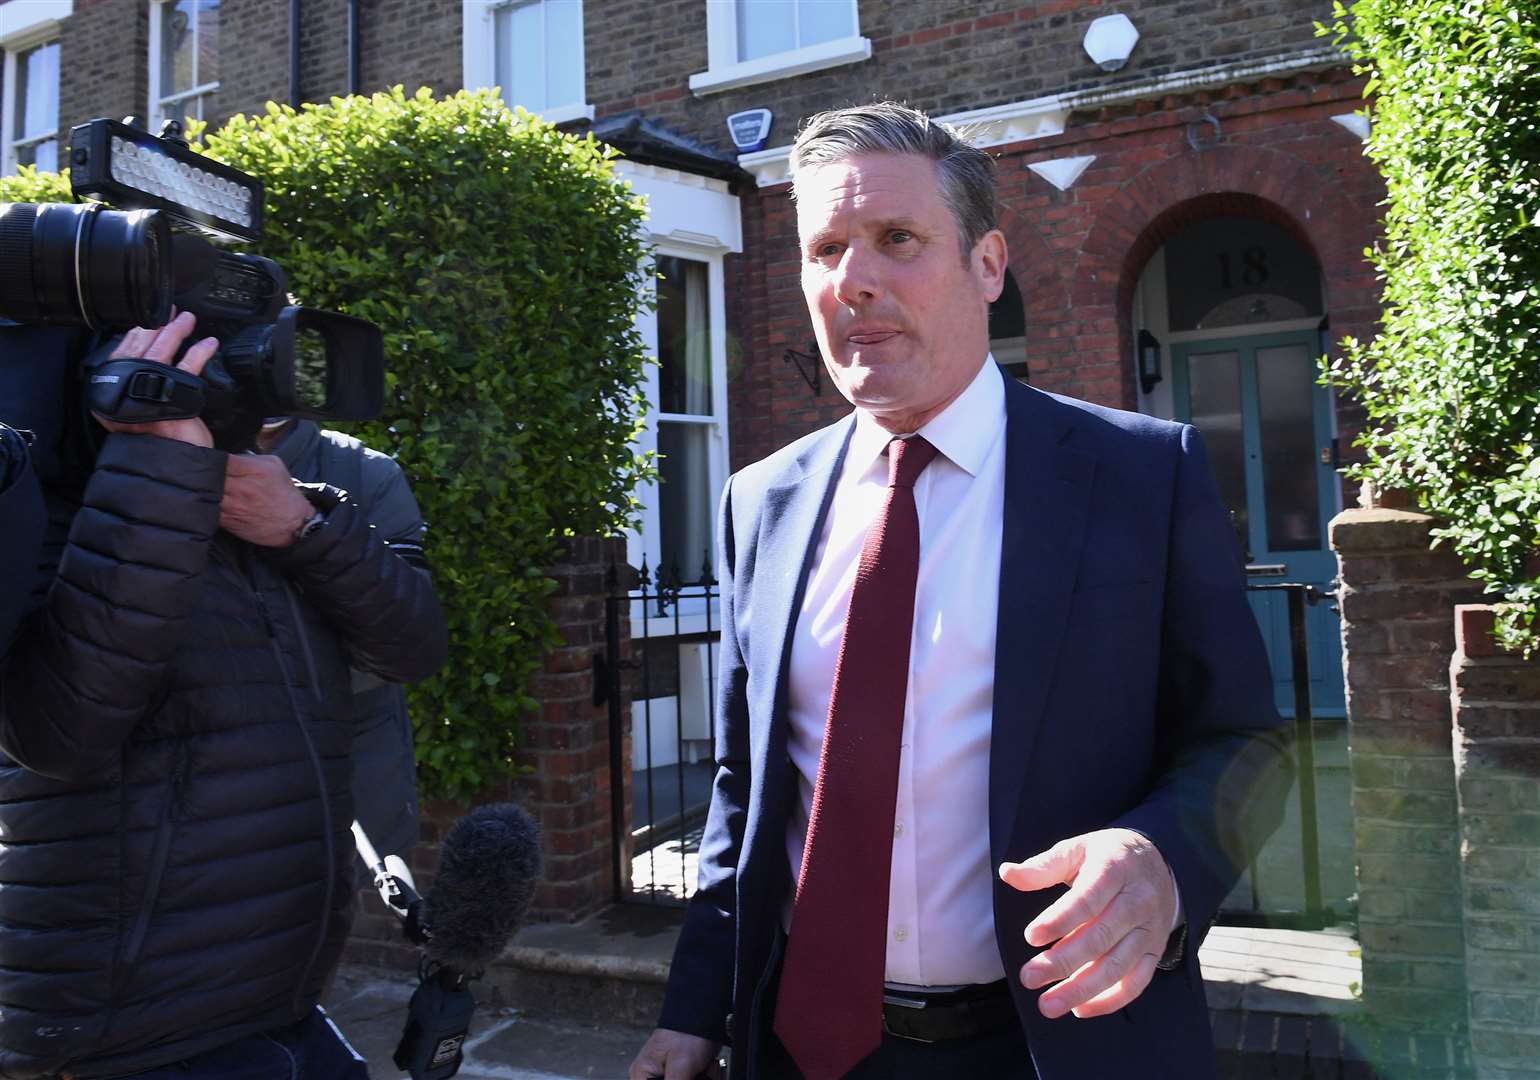 Sir Keir Starmer emerges from his London home following the Hartlepool by-election in May 2021 (Stefan Rousseau/PA)